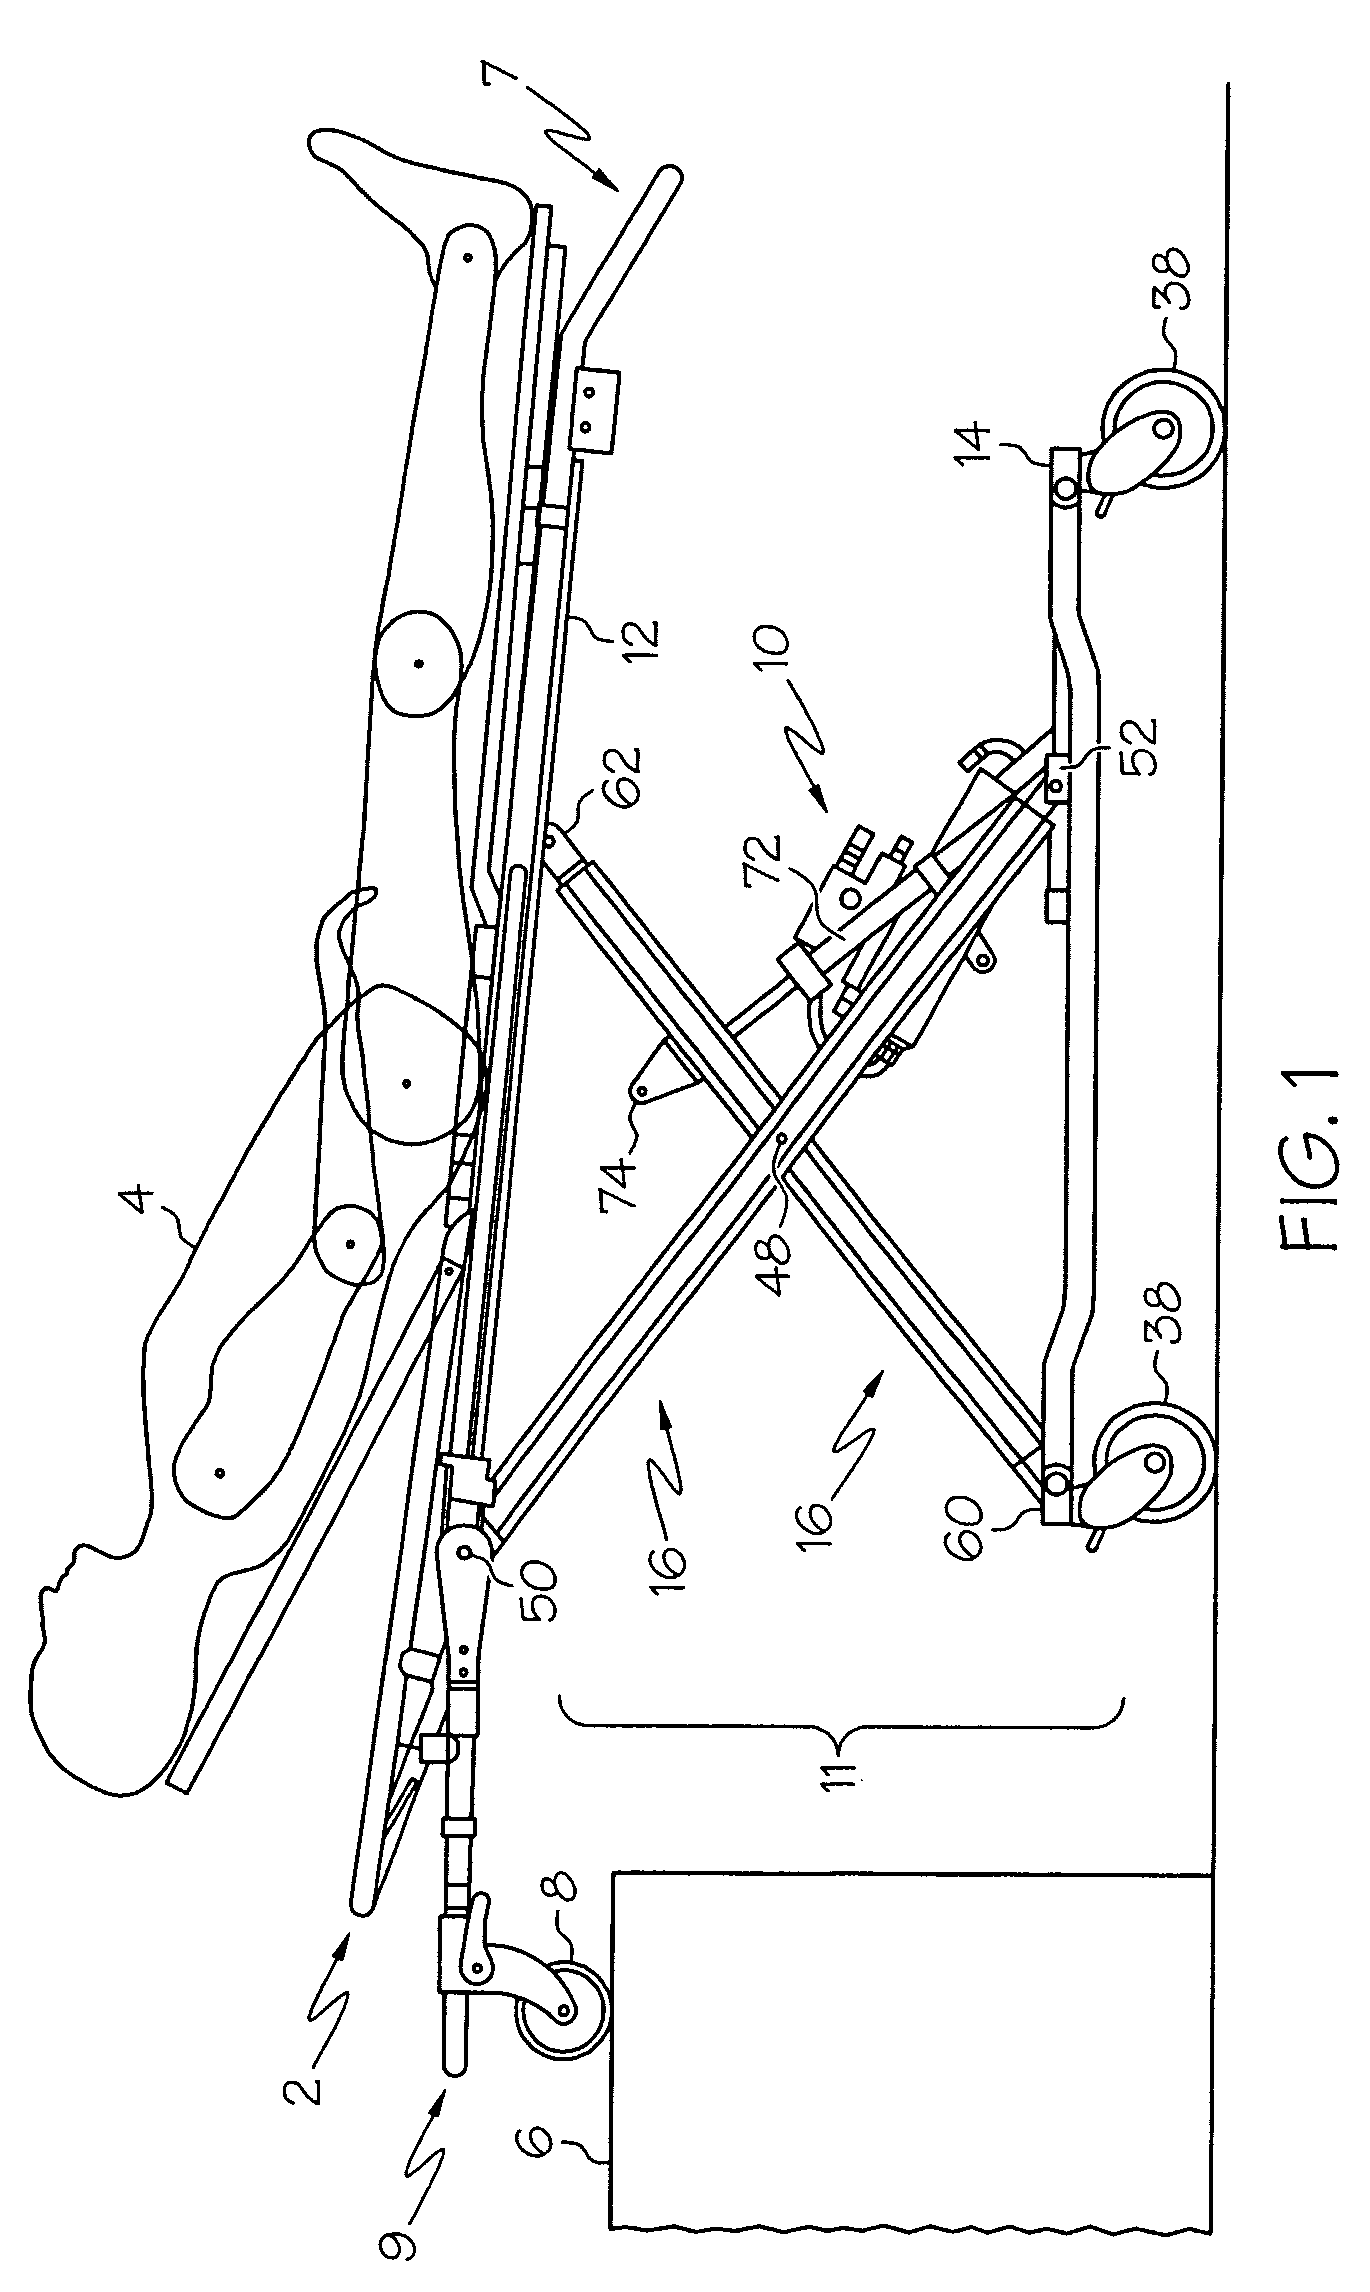 Charging system for recharging a battery of powered lift ambulance cot with an electrical system of an emergency vehicle